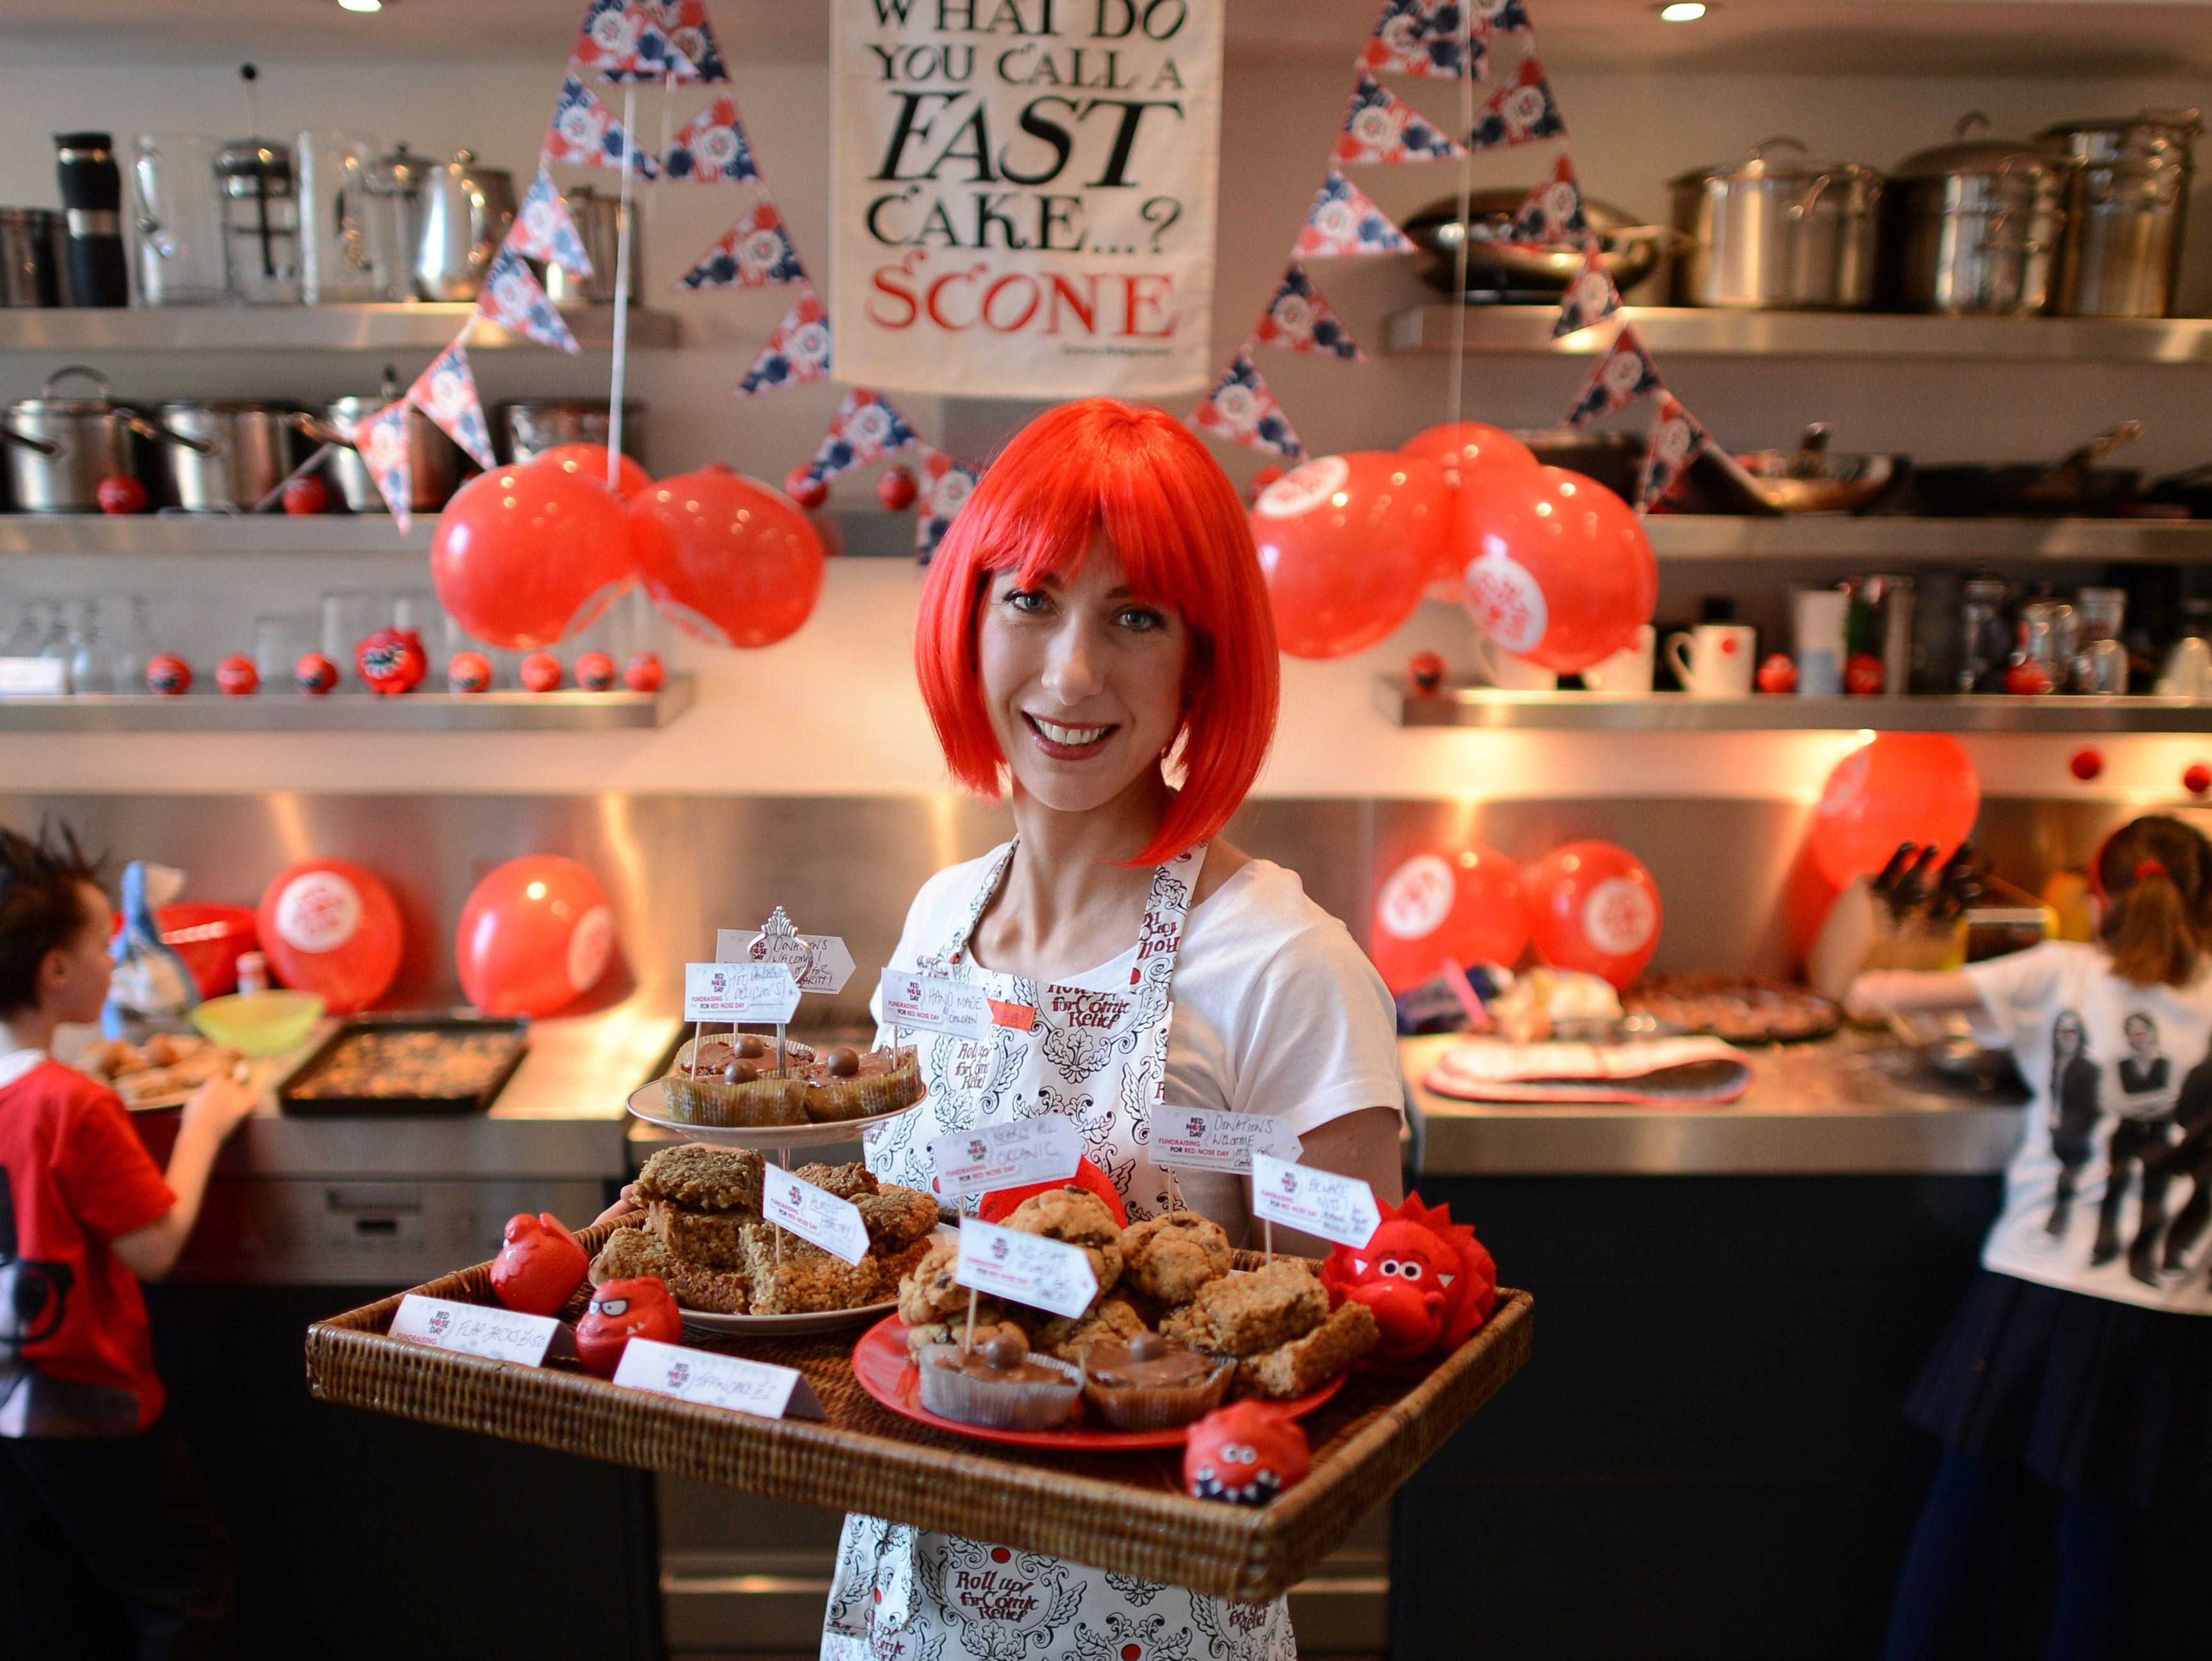 Samantha Cameron bakes in the Downing Street kitchen for Red Nose Day, London, Britain - 05 Mar 2013